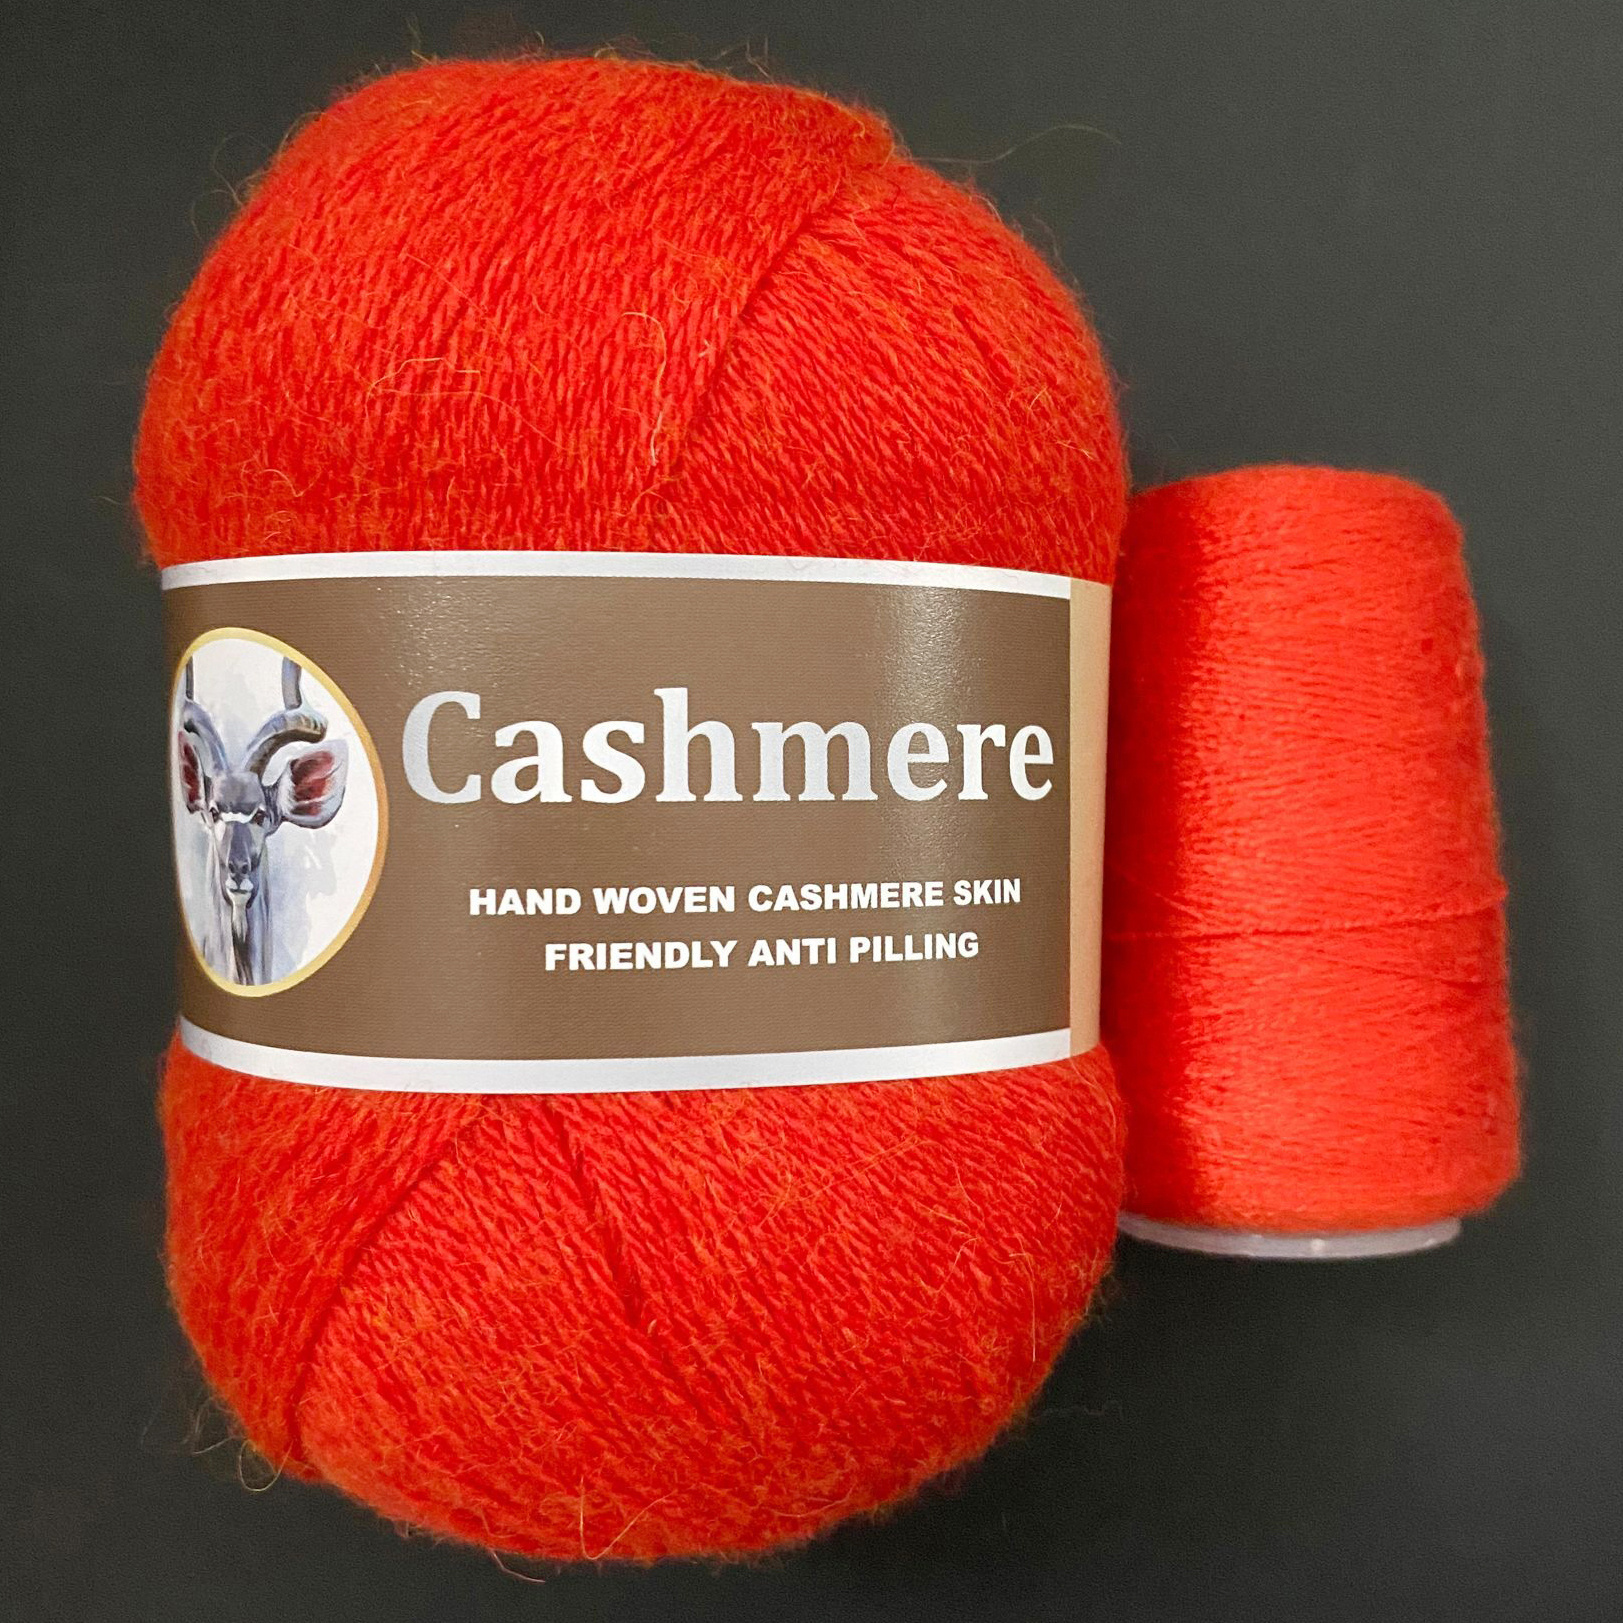 Pure Cashmere Fingering Weight Cotton Yarn Set For Crochet, Hand Knitted,  Scarf, Sweater QJH Wool Ball Thread Yell L231013 From Burberyrry, $5.27